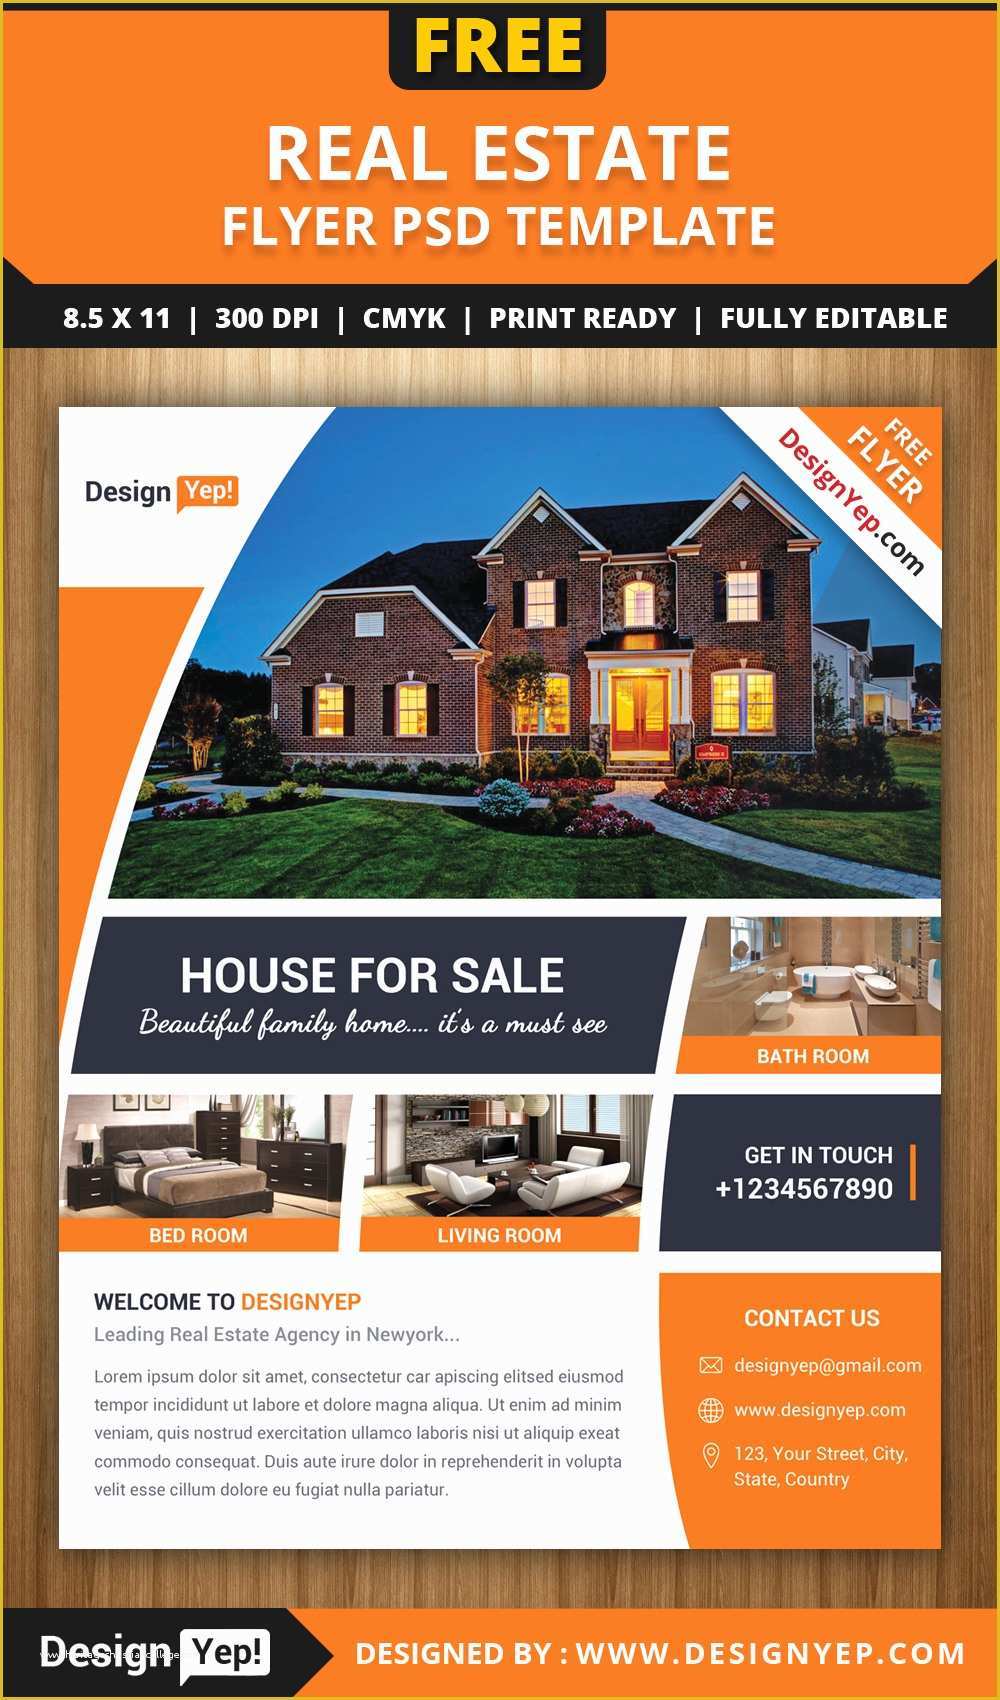 Real Estate Listing Flyer Template Free Of How to Answer Line Dating Questions